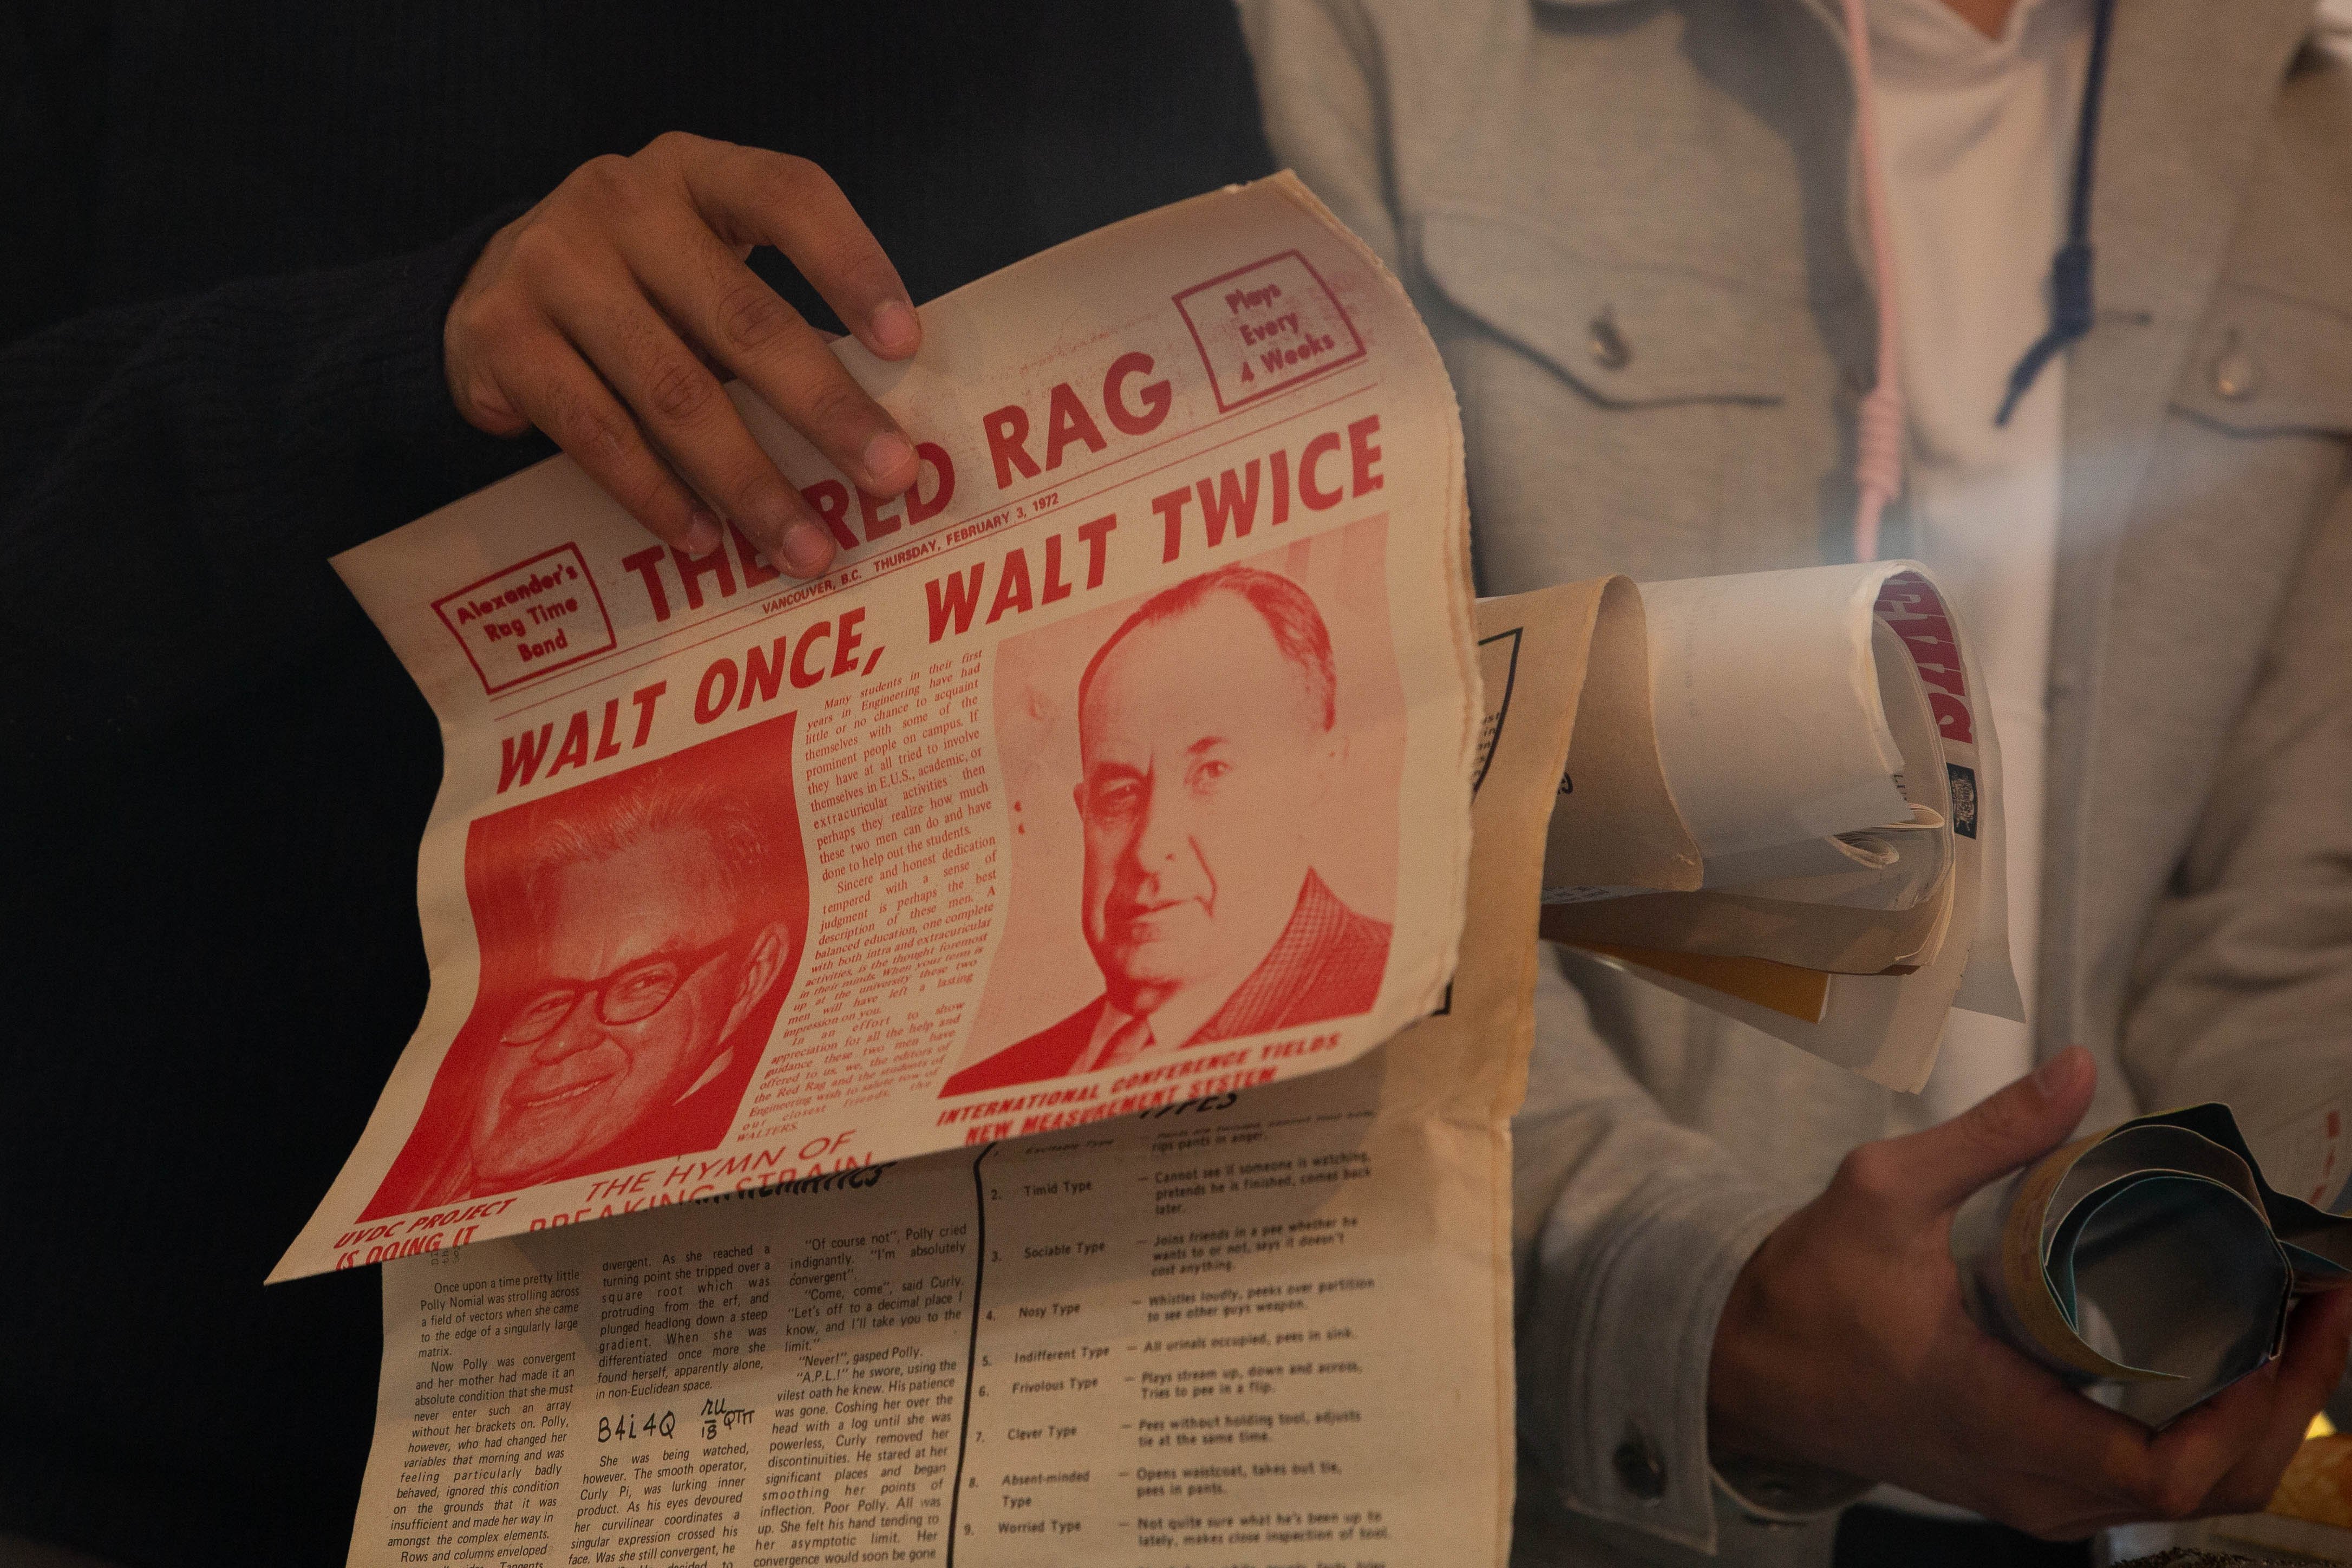 The Red Rag, an engineering publication which Bhangu described as "PG-13 content" was one of many newspapers in the capsule.